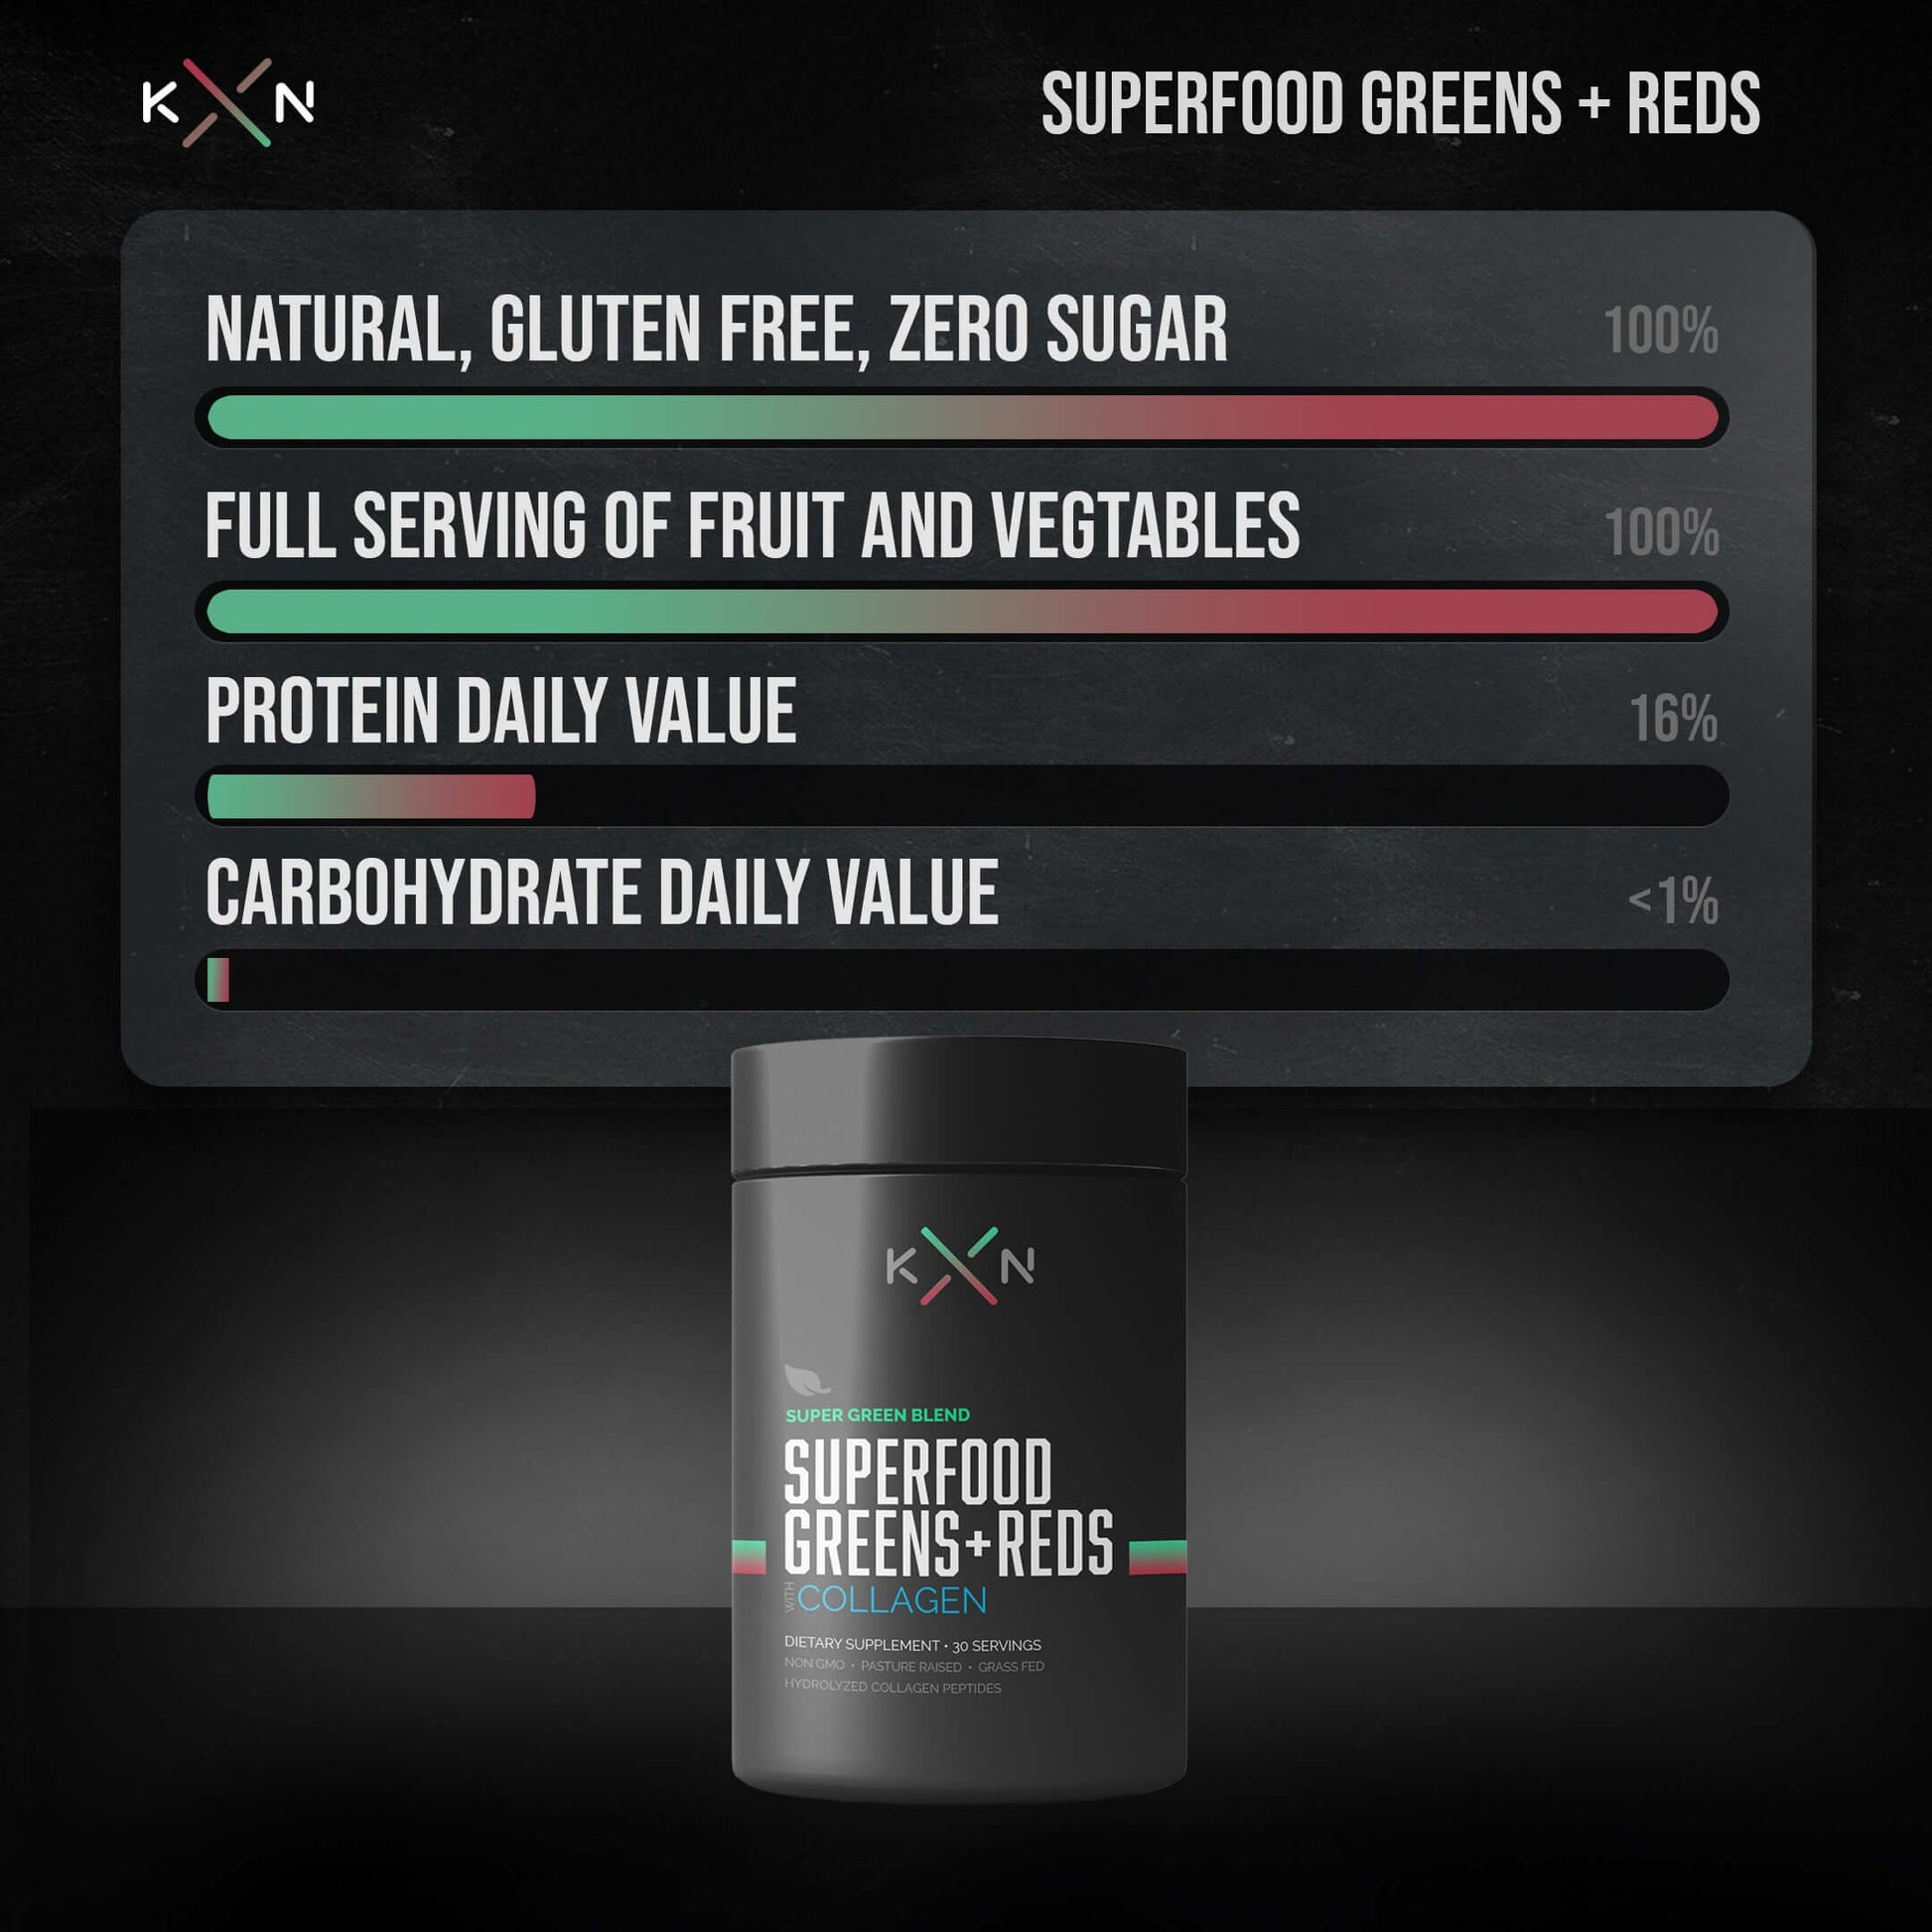 Info Graphic showing benefits of super Greens and reds w/ collagen peptides